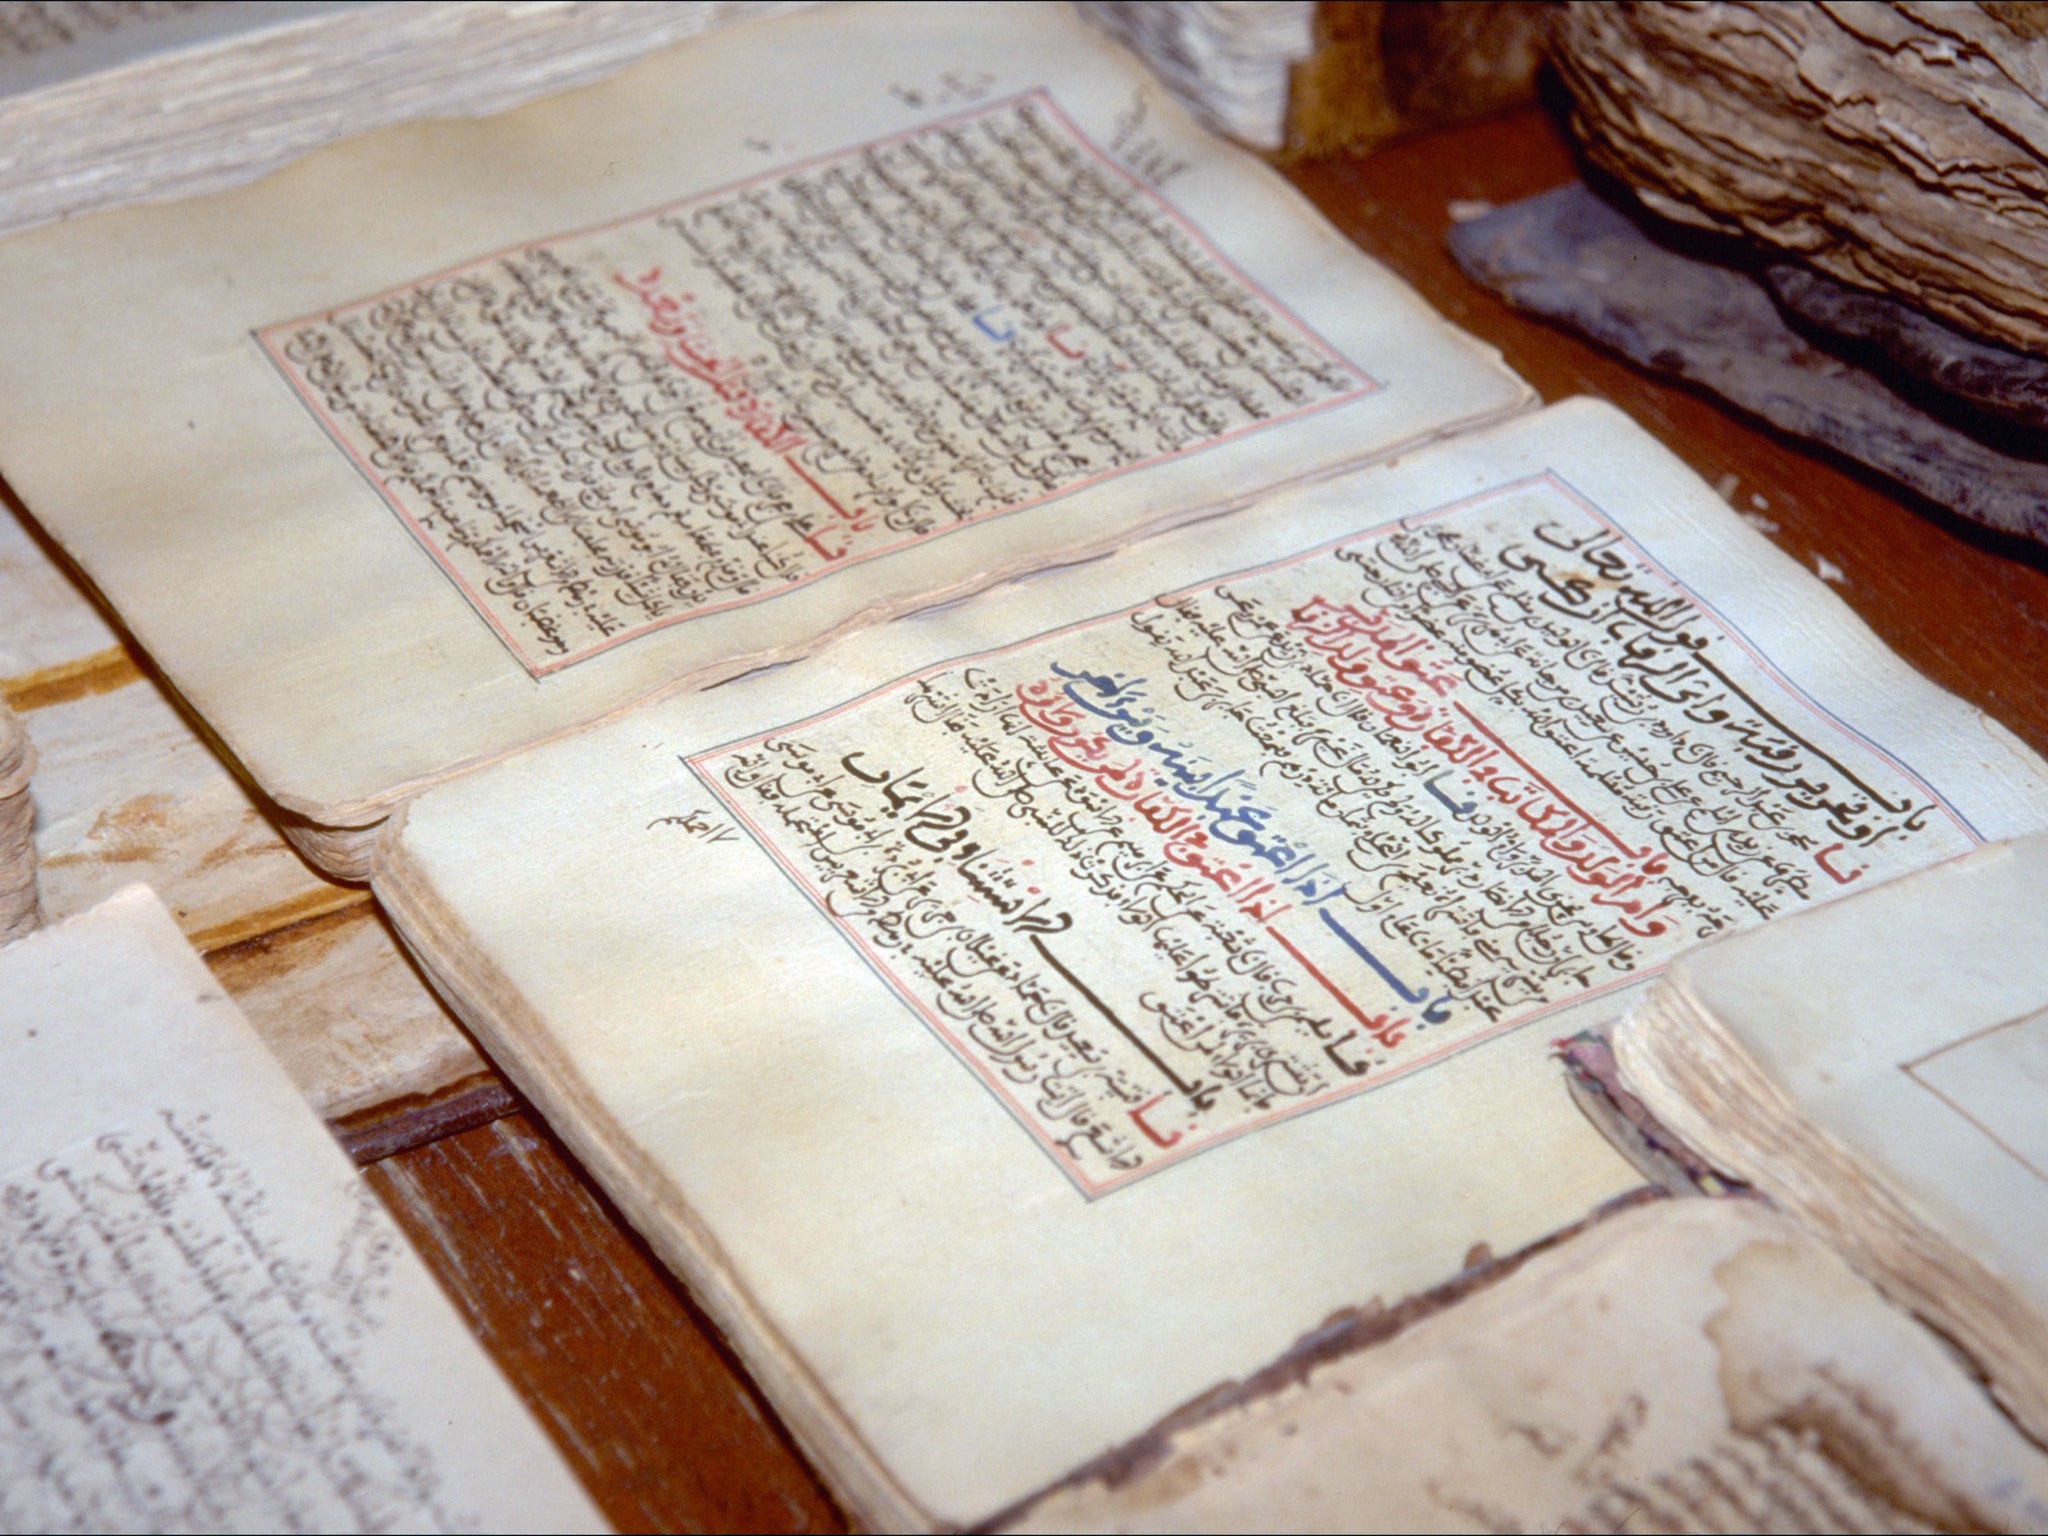 Ancient manuscripts on display at the library in Timbuktu, preserved from their destruction at the hands of Ansar Dine, one of the hardline Islamist groups controlling northern Mali